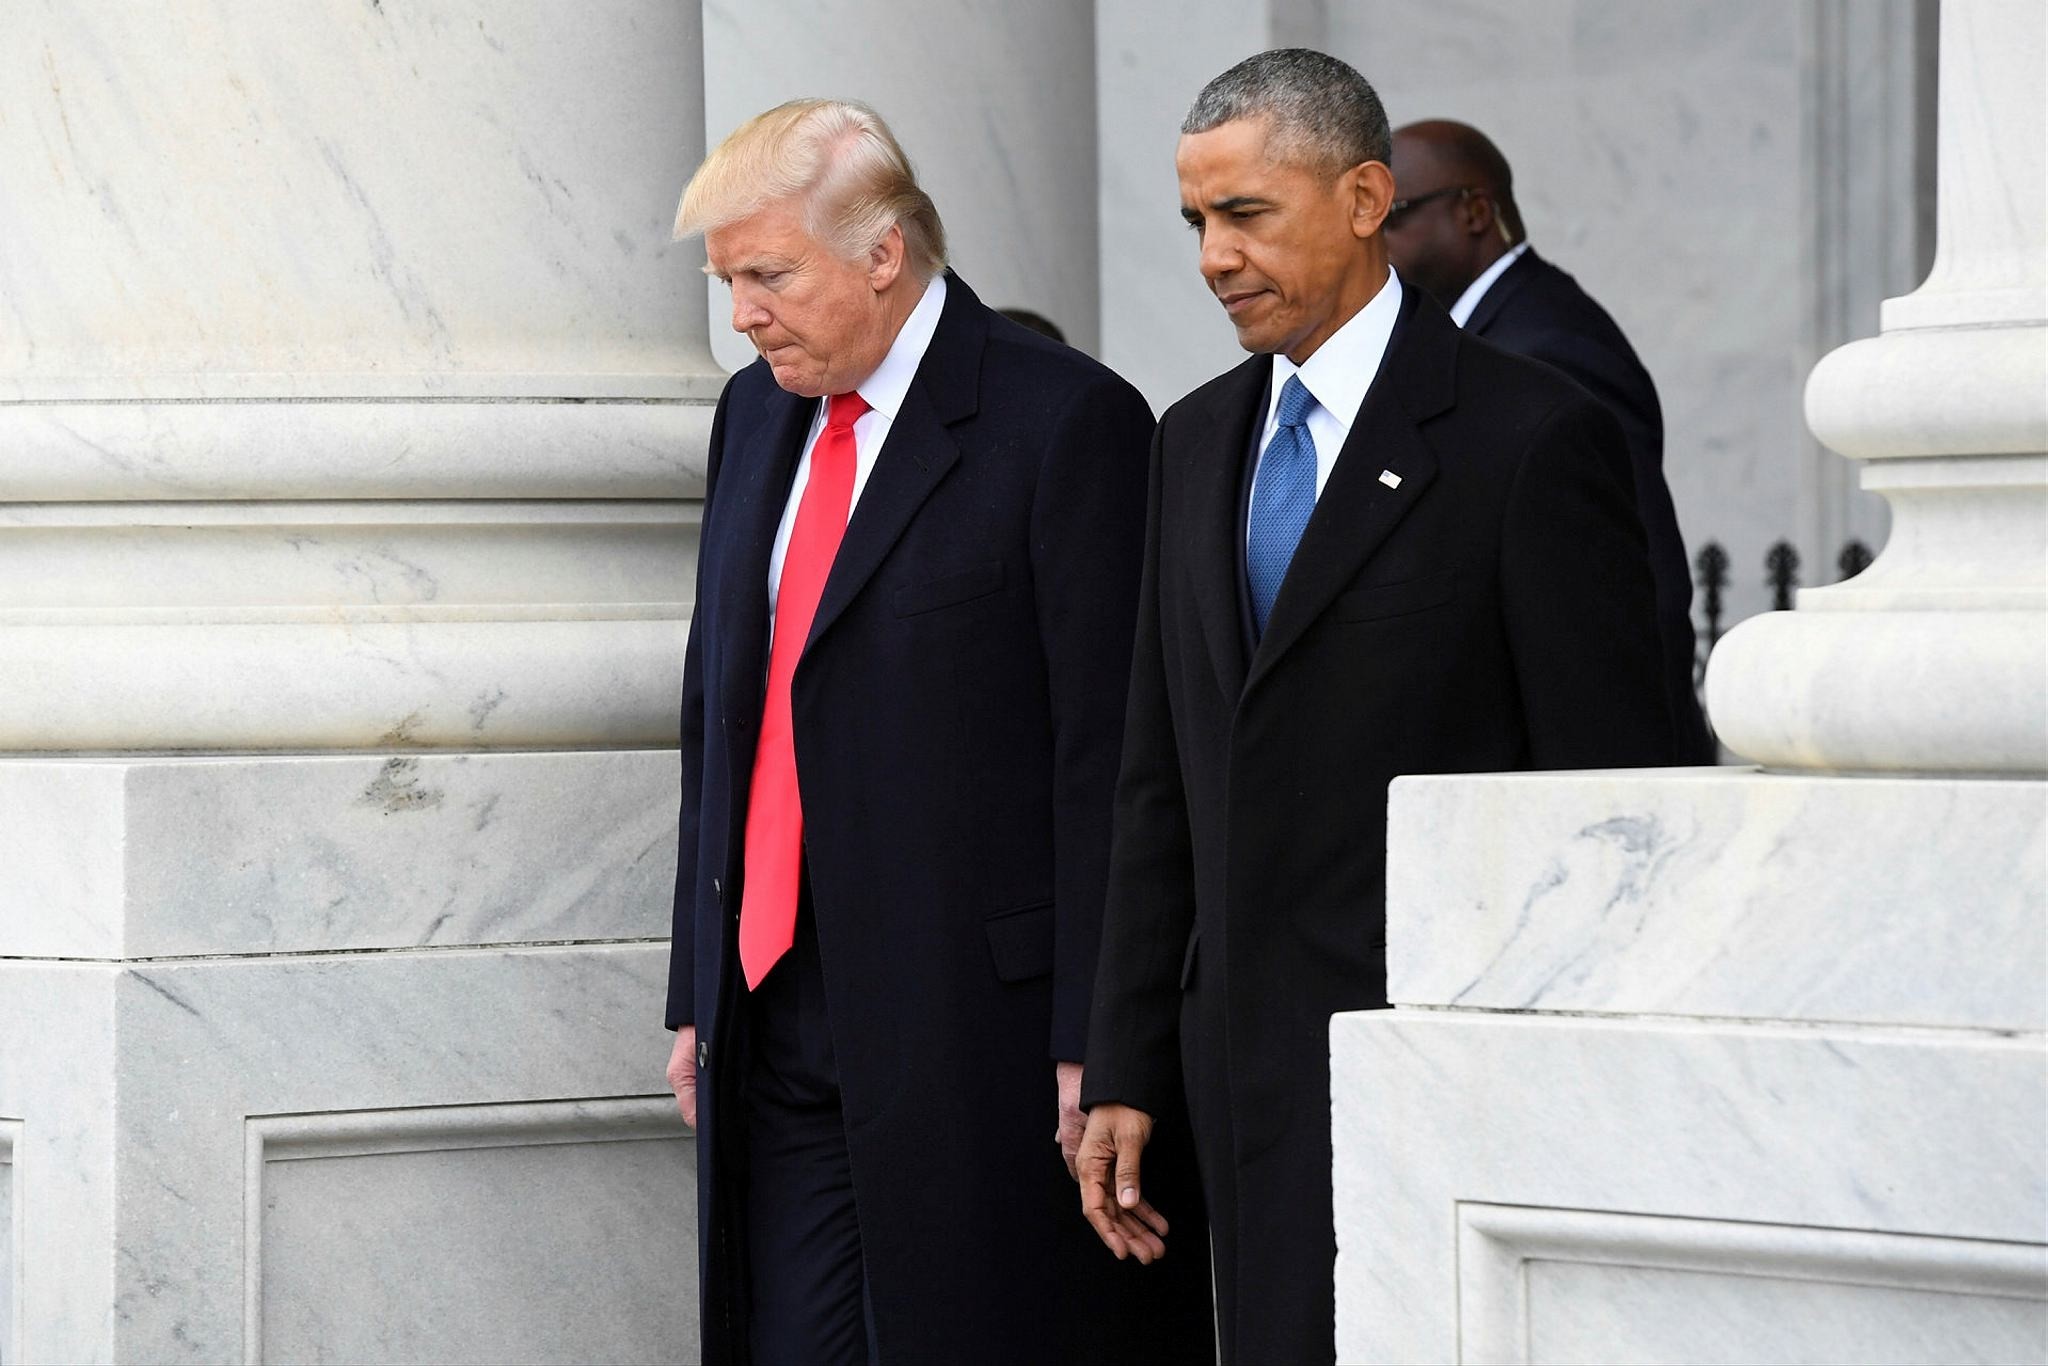 U.S. President Donald Trump and former President Barack Obama walk out of the East front in Washington, D.C., U.S. January 20, 2017. (REUTERS Photo)